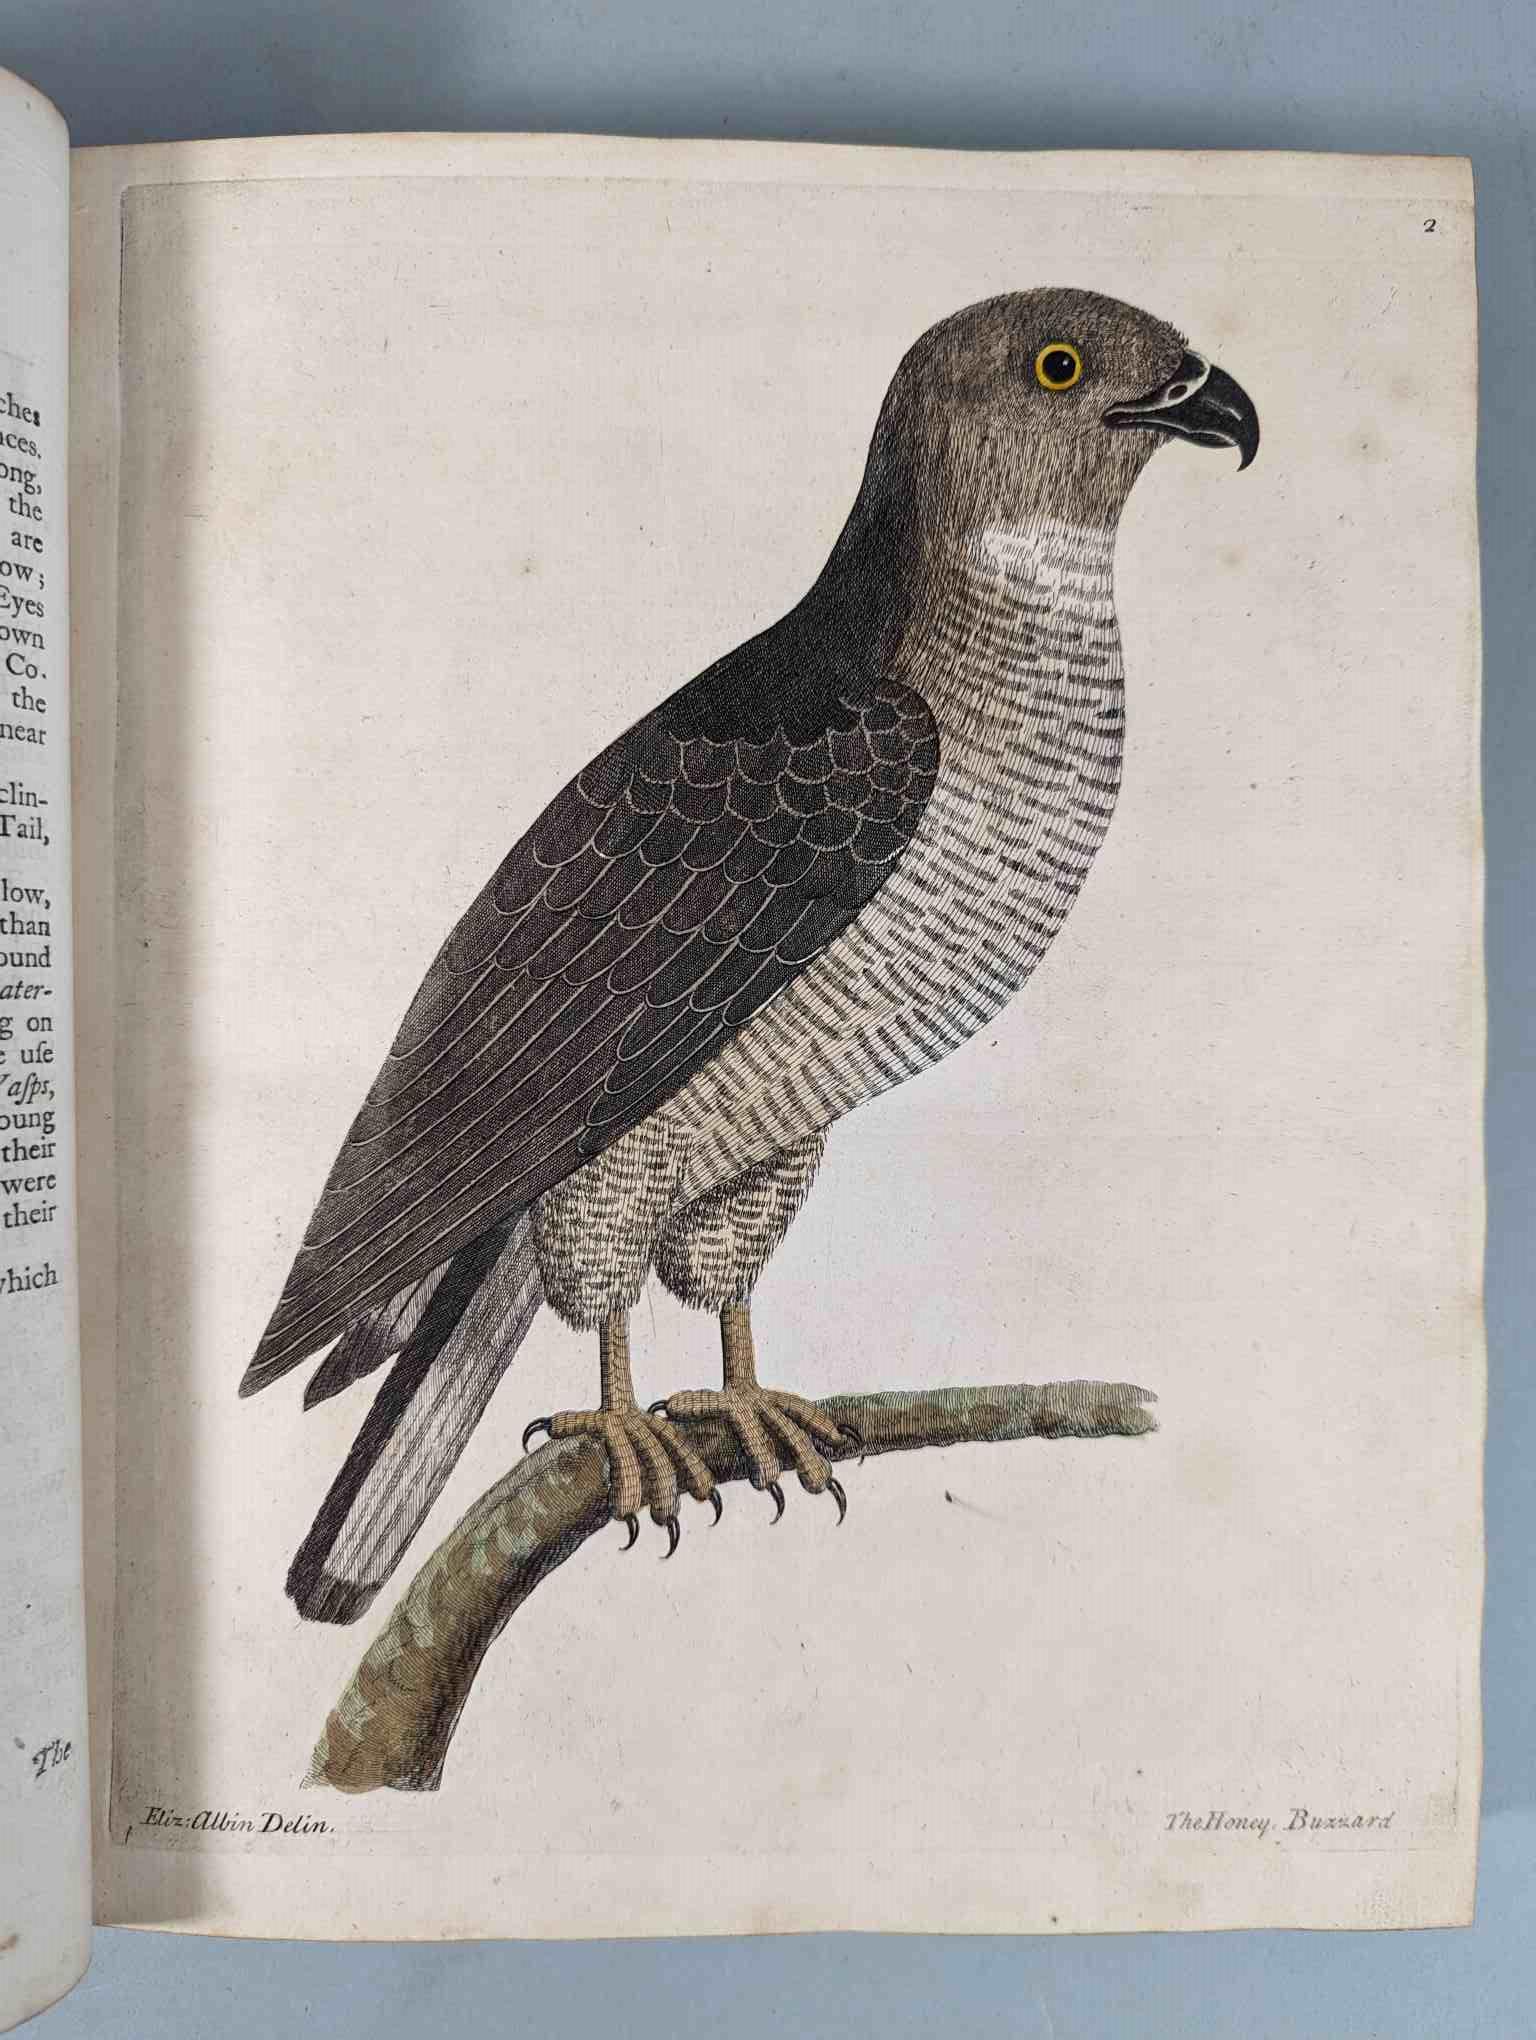 ALBIN, Eleazar. A Natural History of Birds, to which are added, Notes and Observations by W. - Image 9 of 208